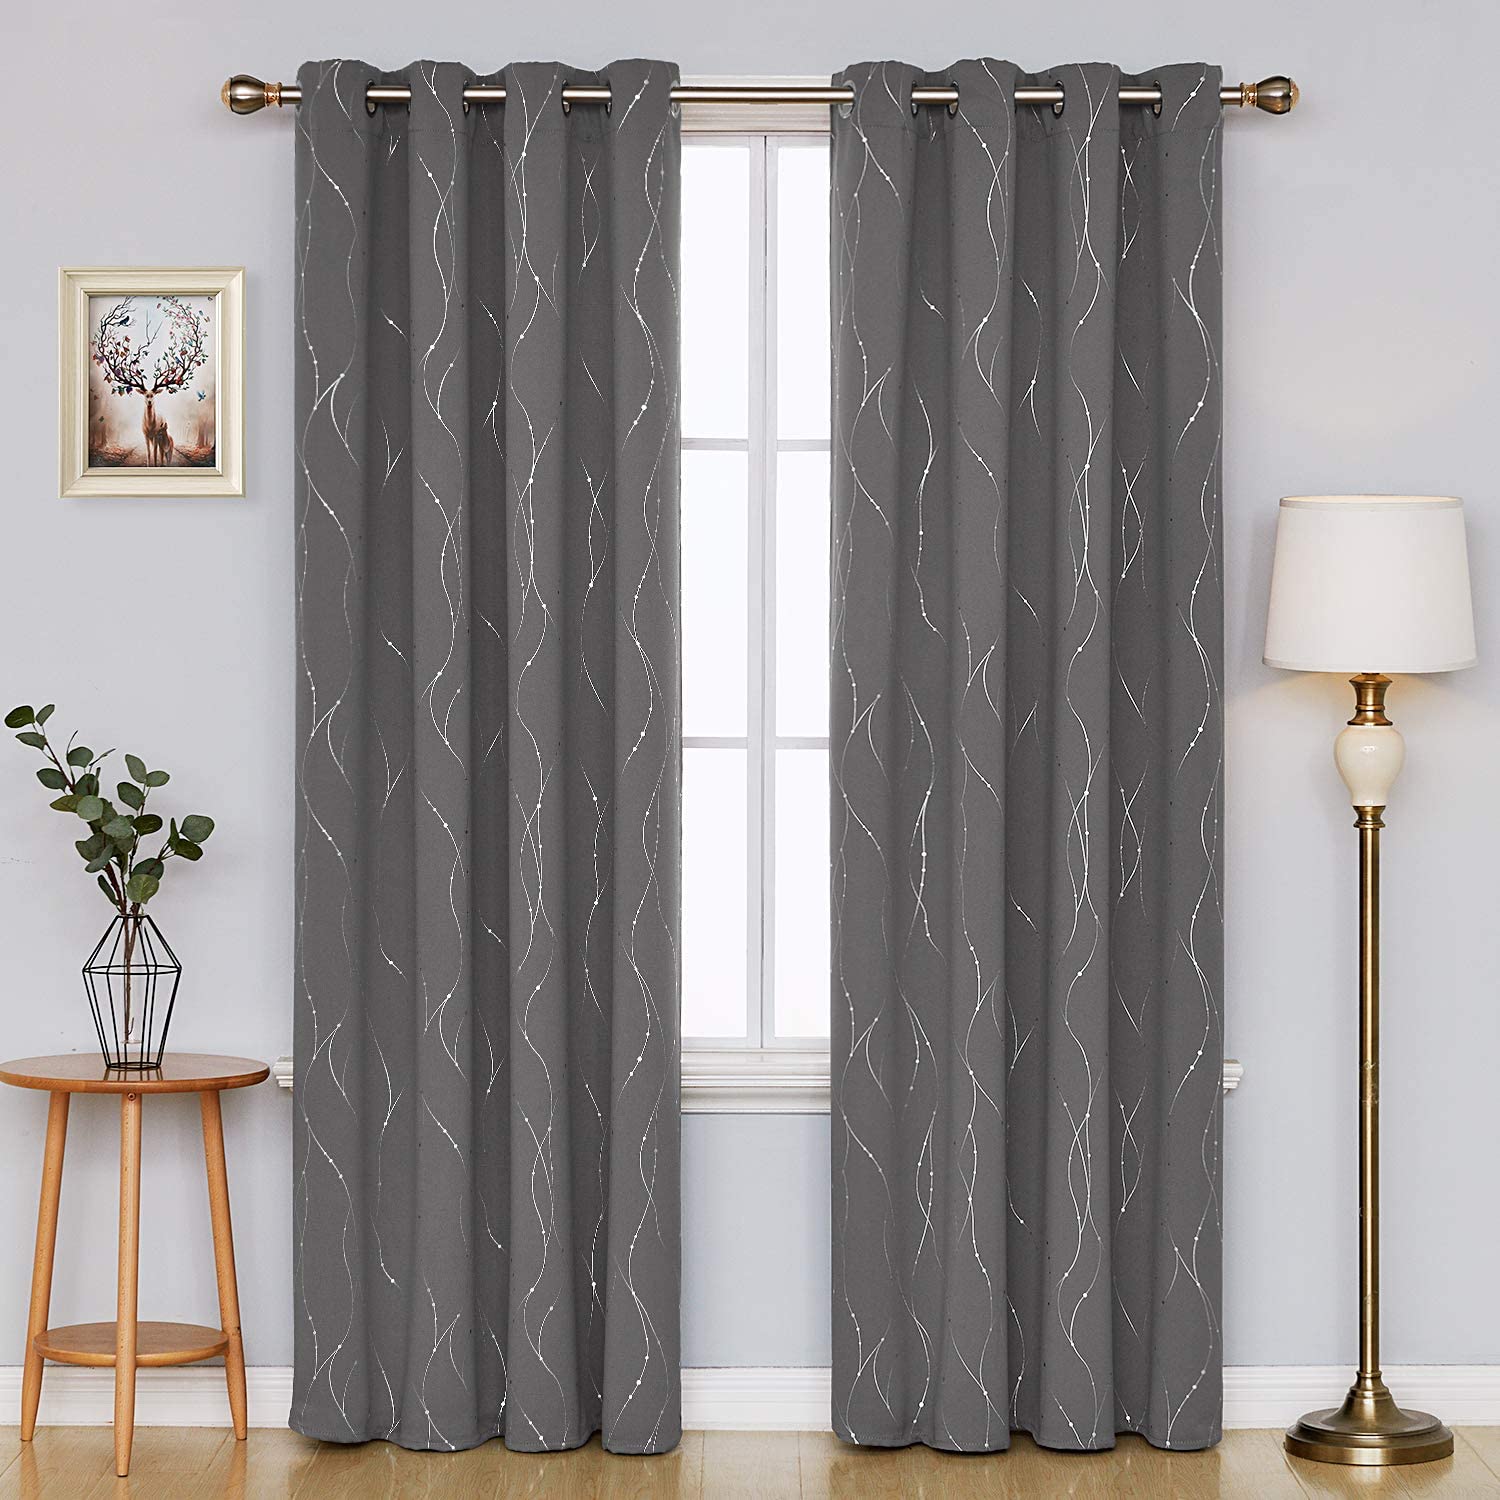 Deconovo Blackout Curtains Grommets with Dots Pattern Thermal Insulated